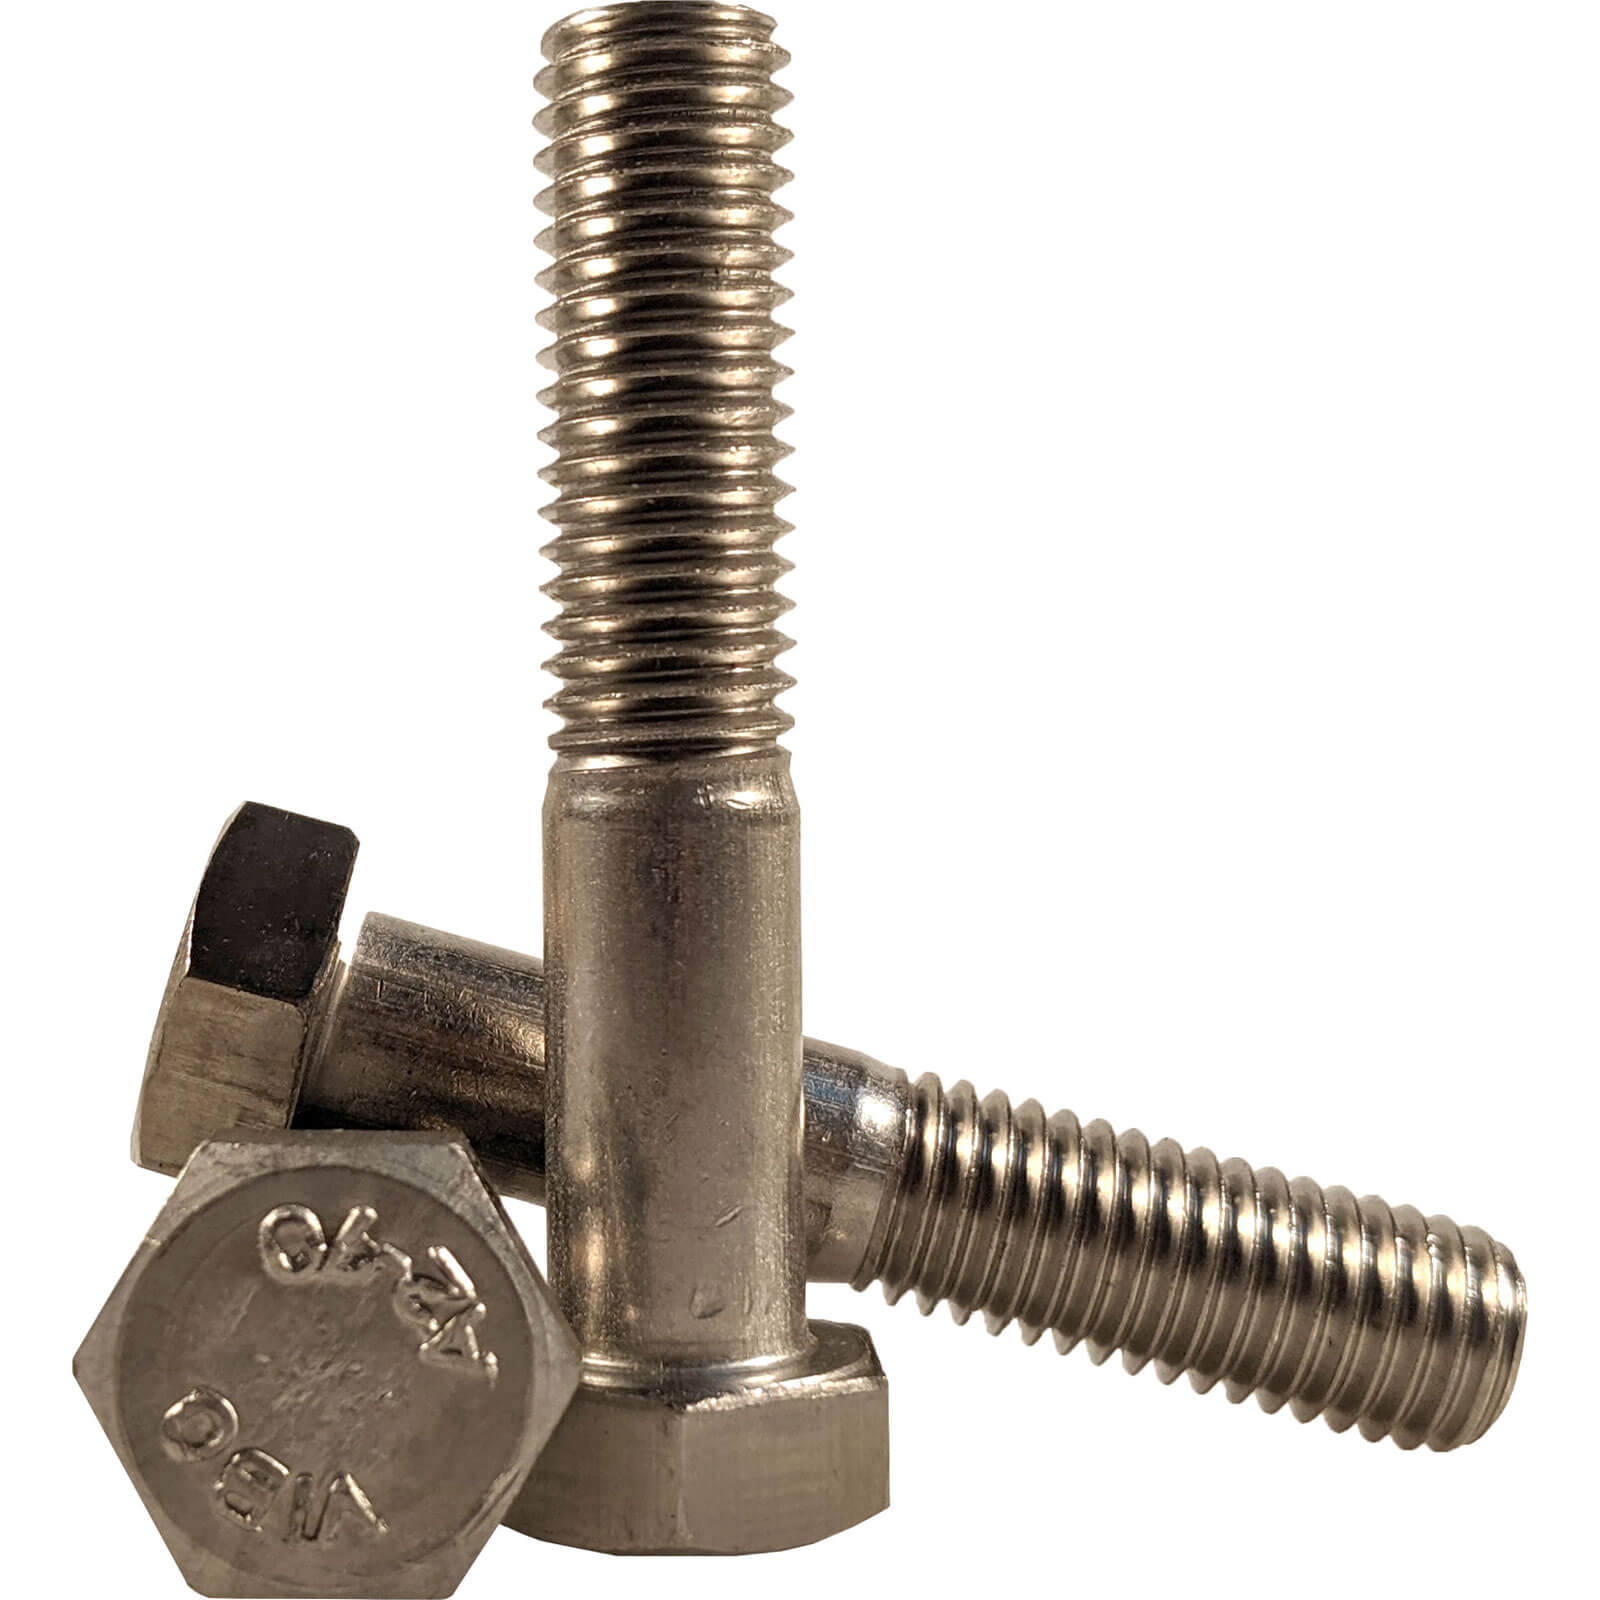 Sirius Bolts A4 316 Stainless Steel M6 45mm Pack of 1